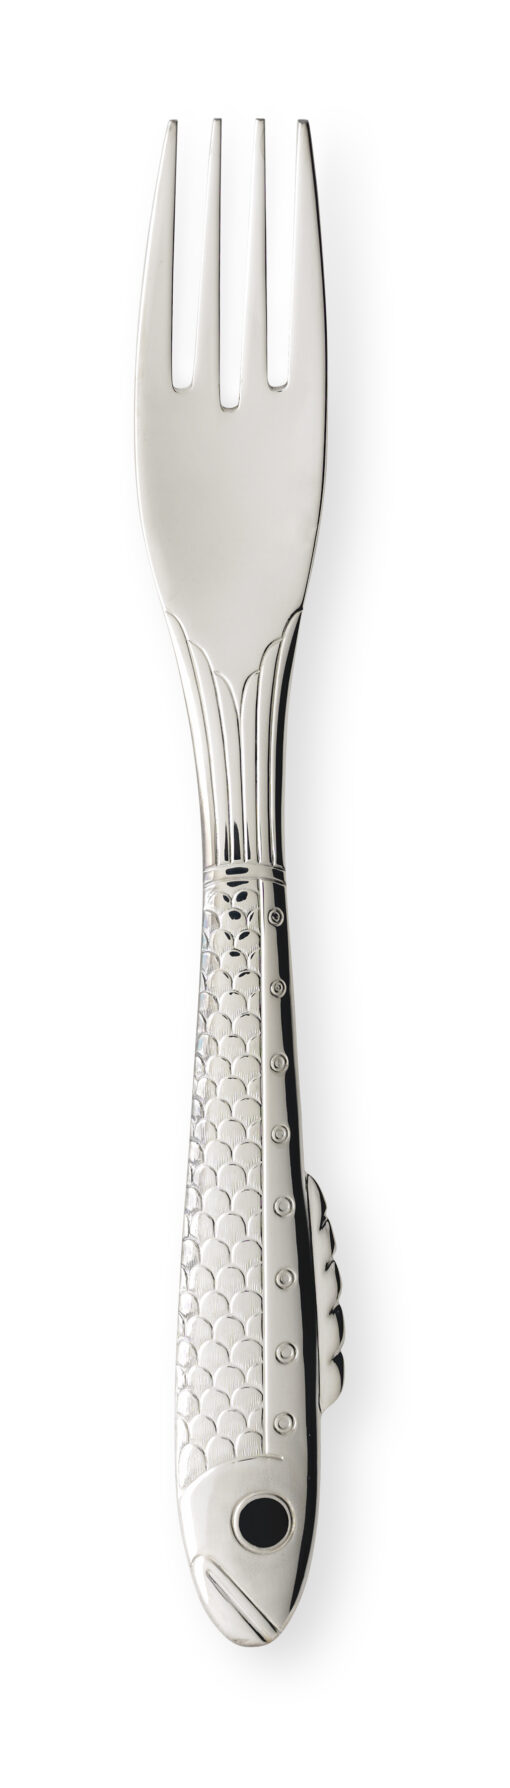 Cutlery Luxury Silver 1 scaled